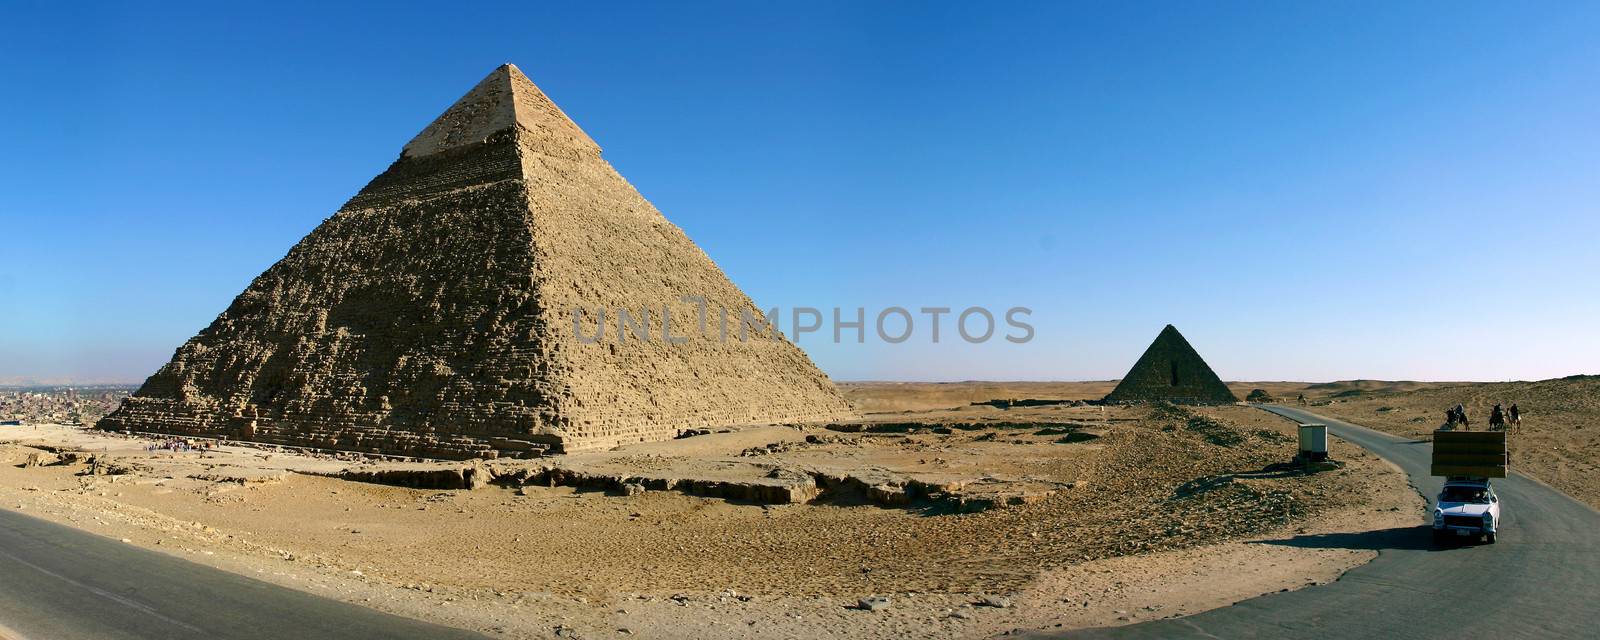 Panorama view of Giza pyramids with a clear blue sky, Egypt.